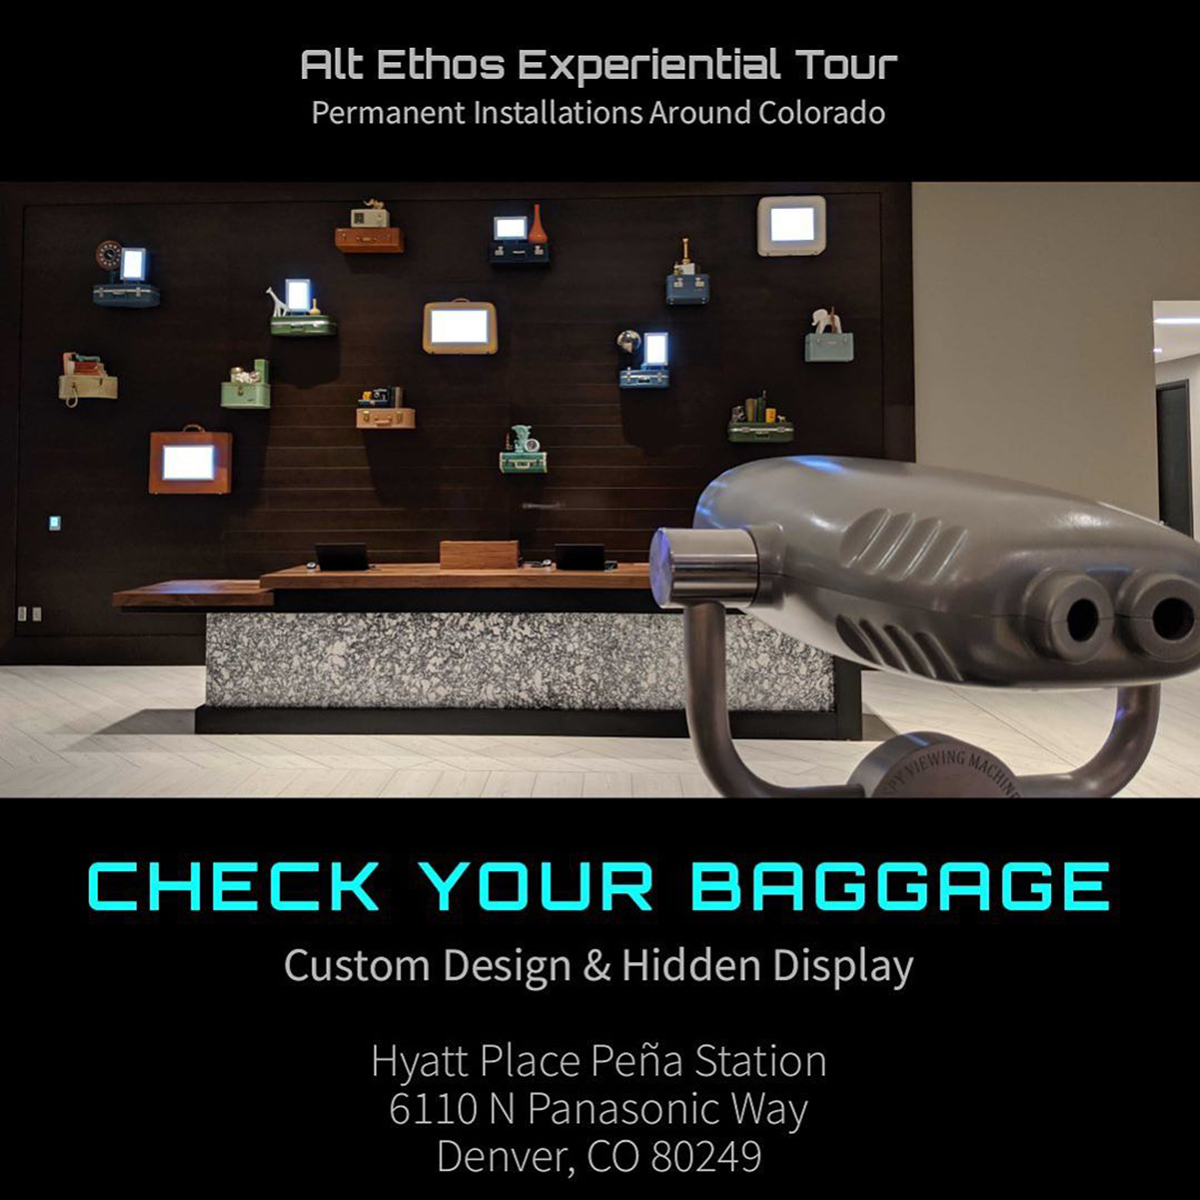 Check Your Baggage Alt Ethos